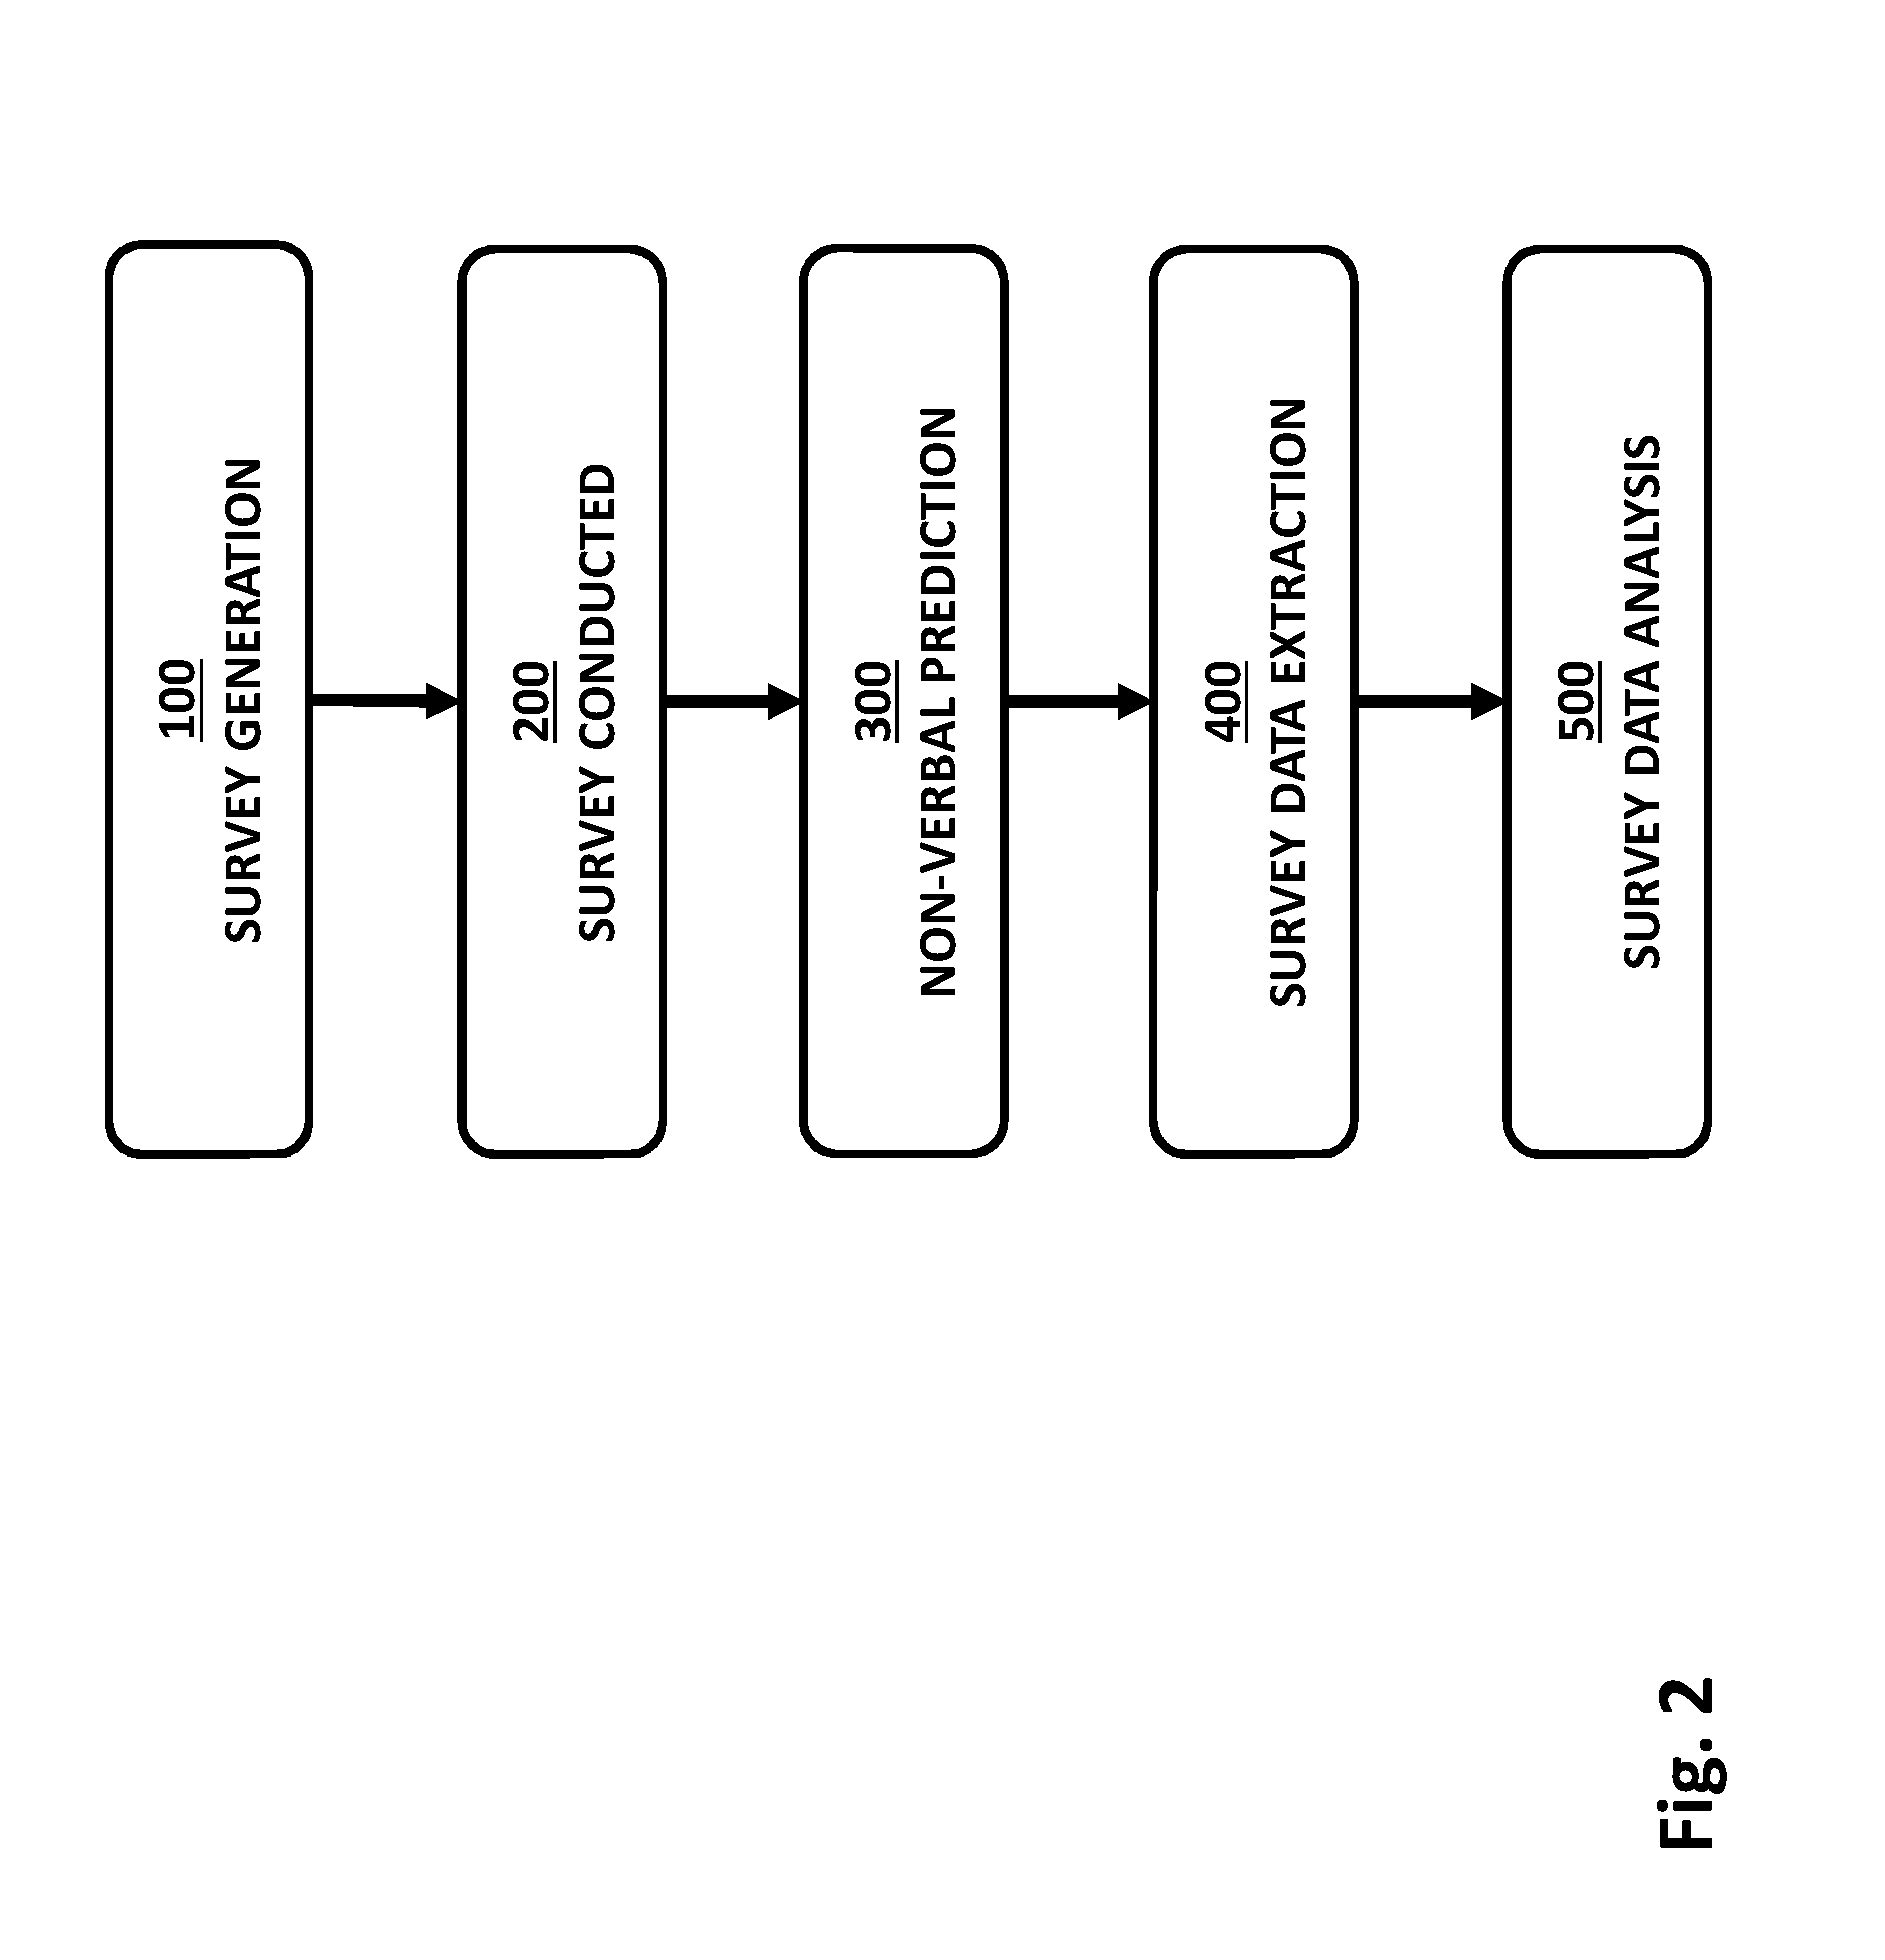 Method and System for Assessing and Measuring Emotional Intensity to a Stimulus